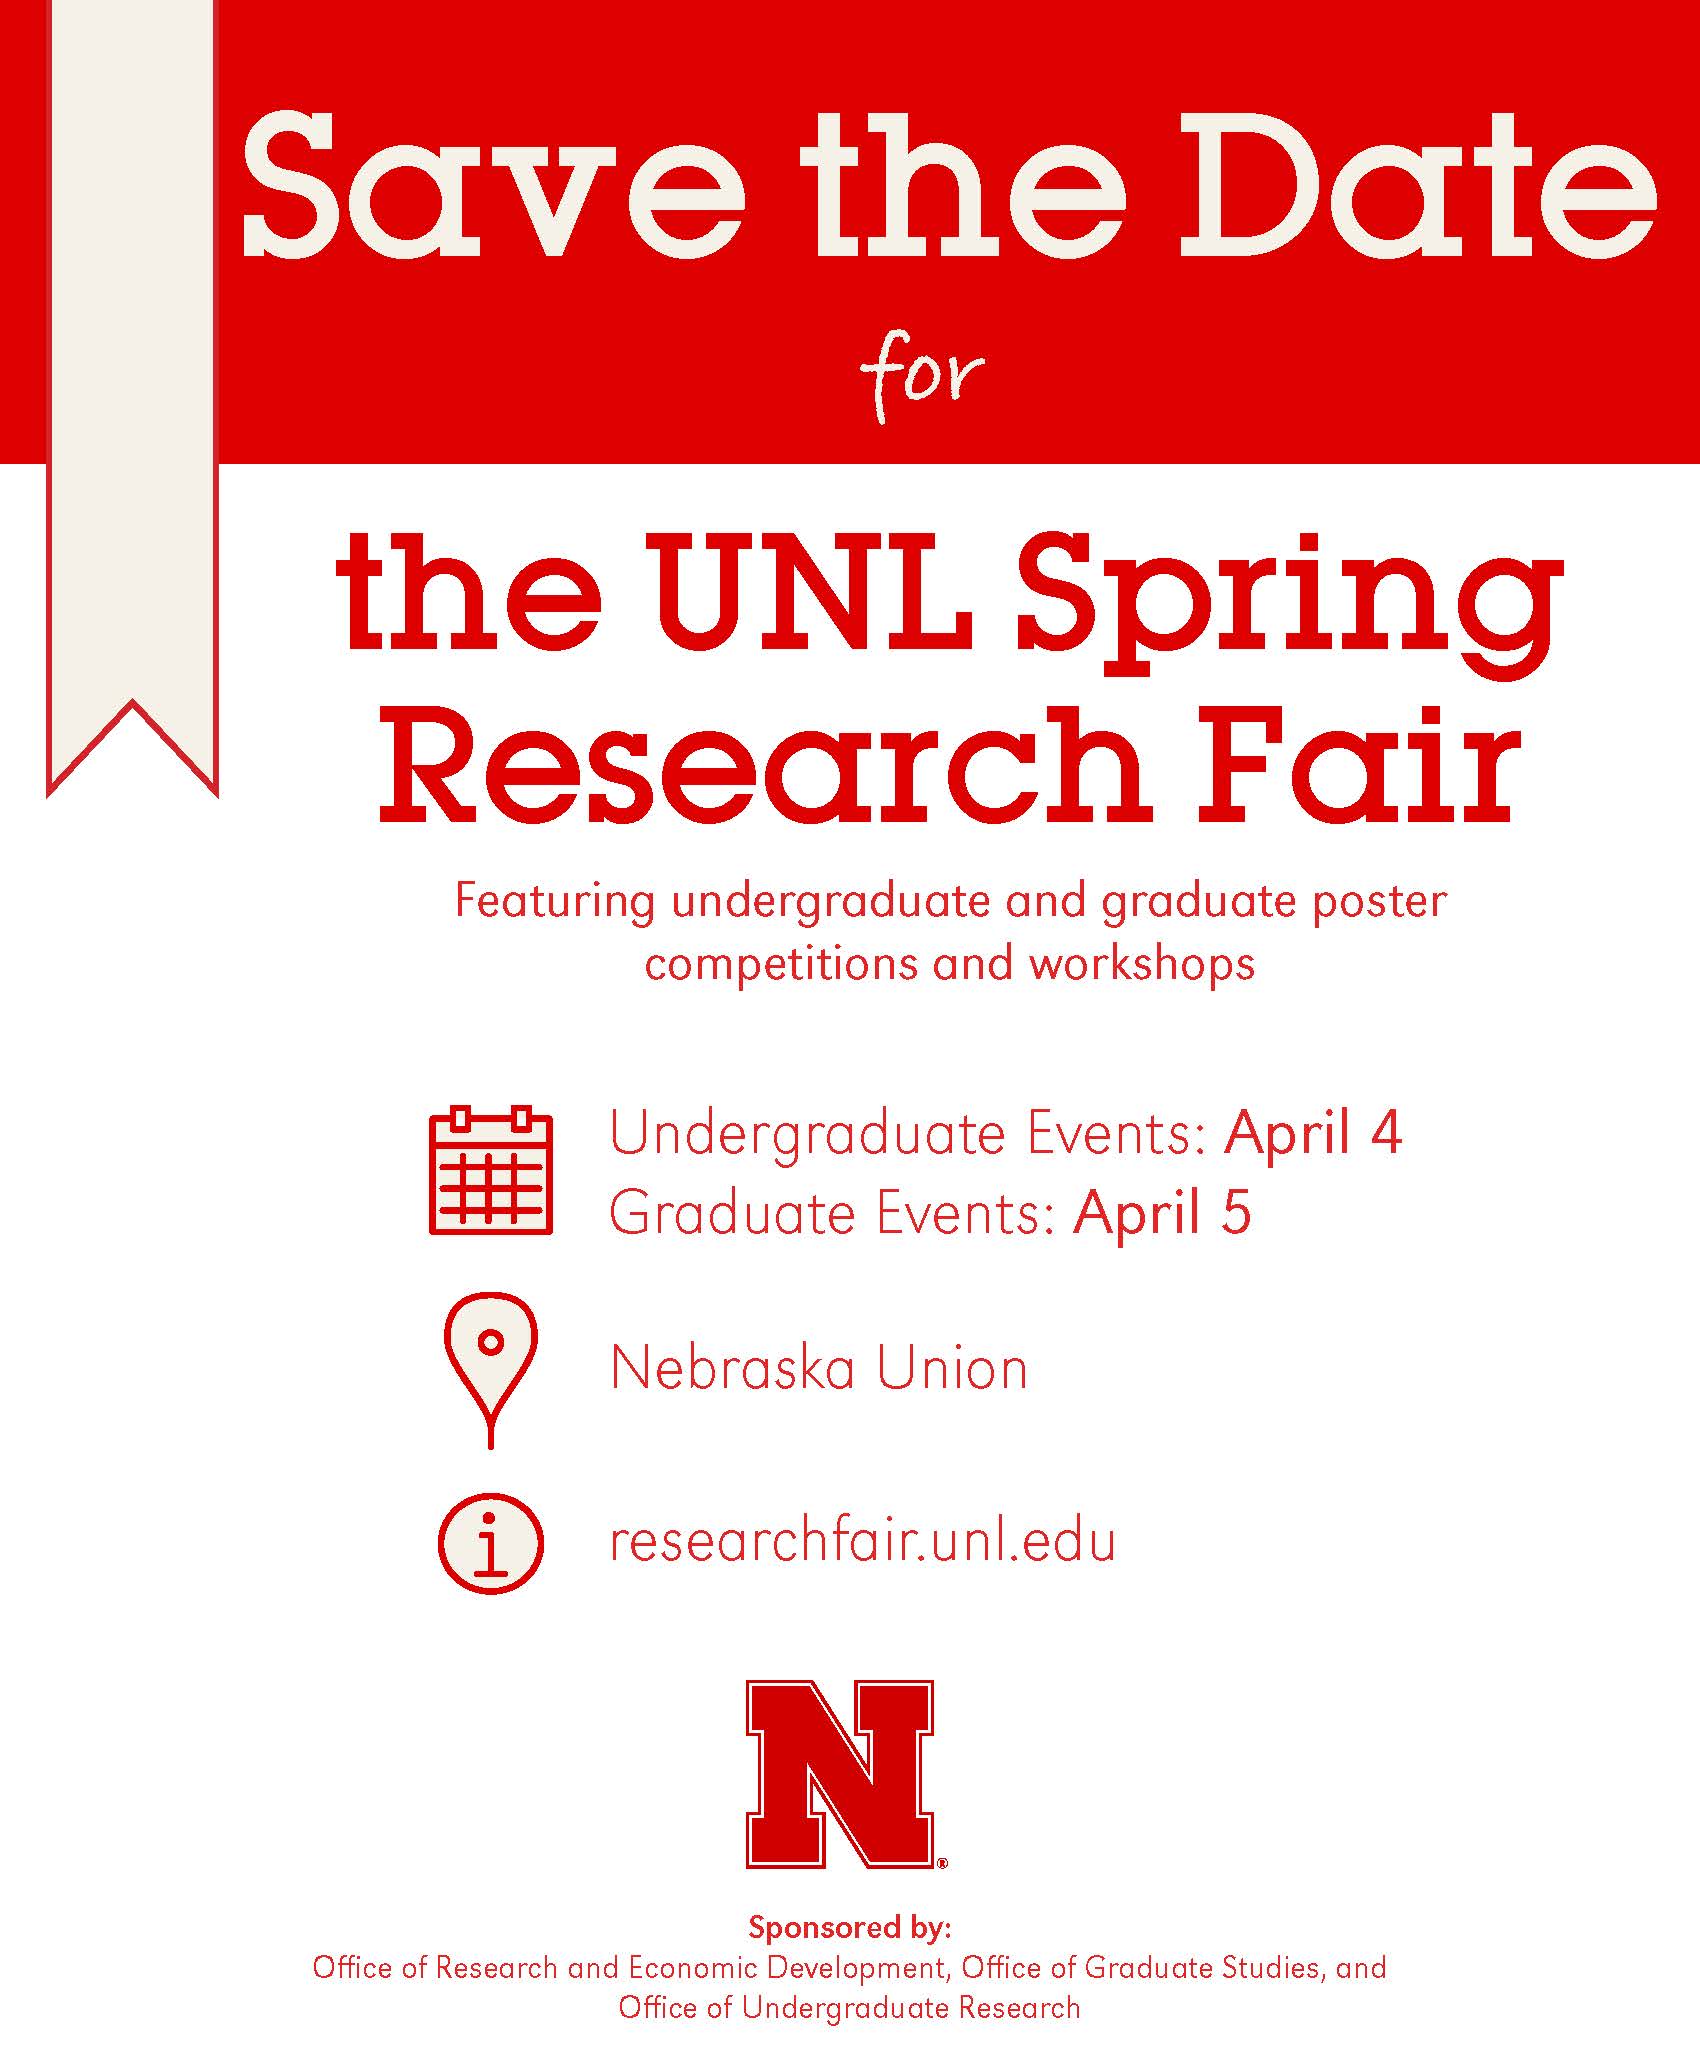 UNL Spring Research Fair Call for Poster Judges & Save the Date